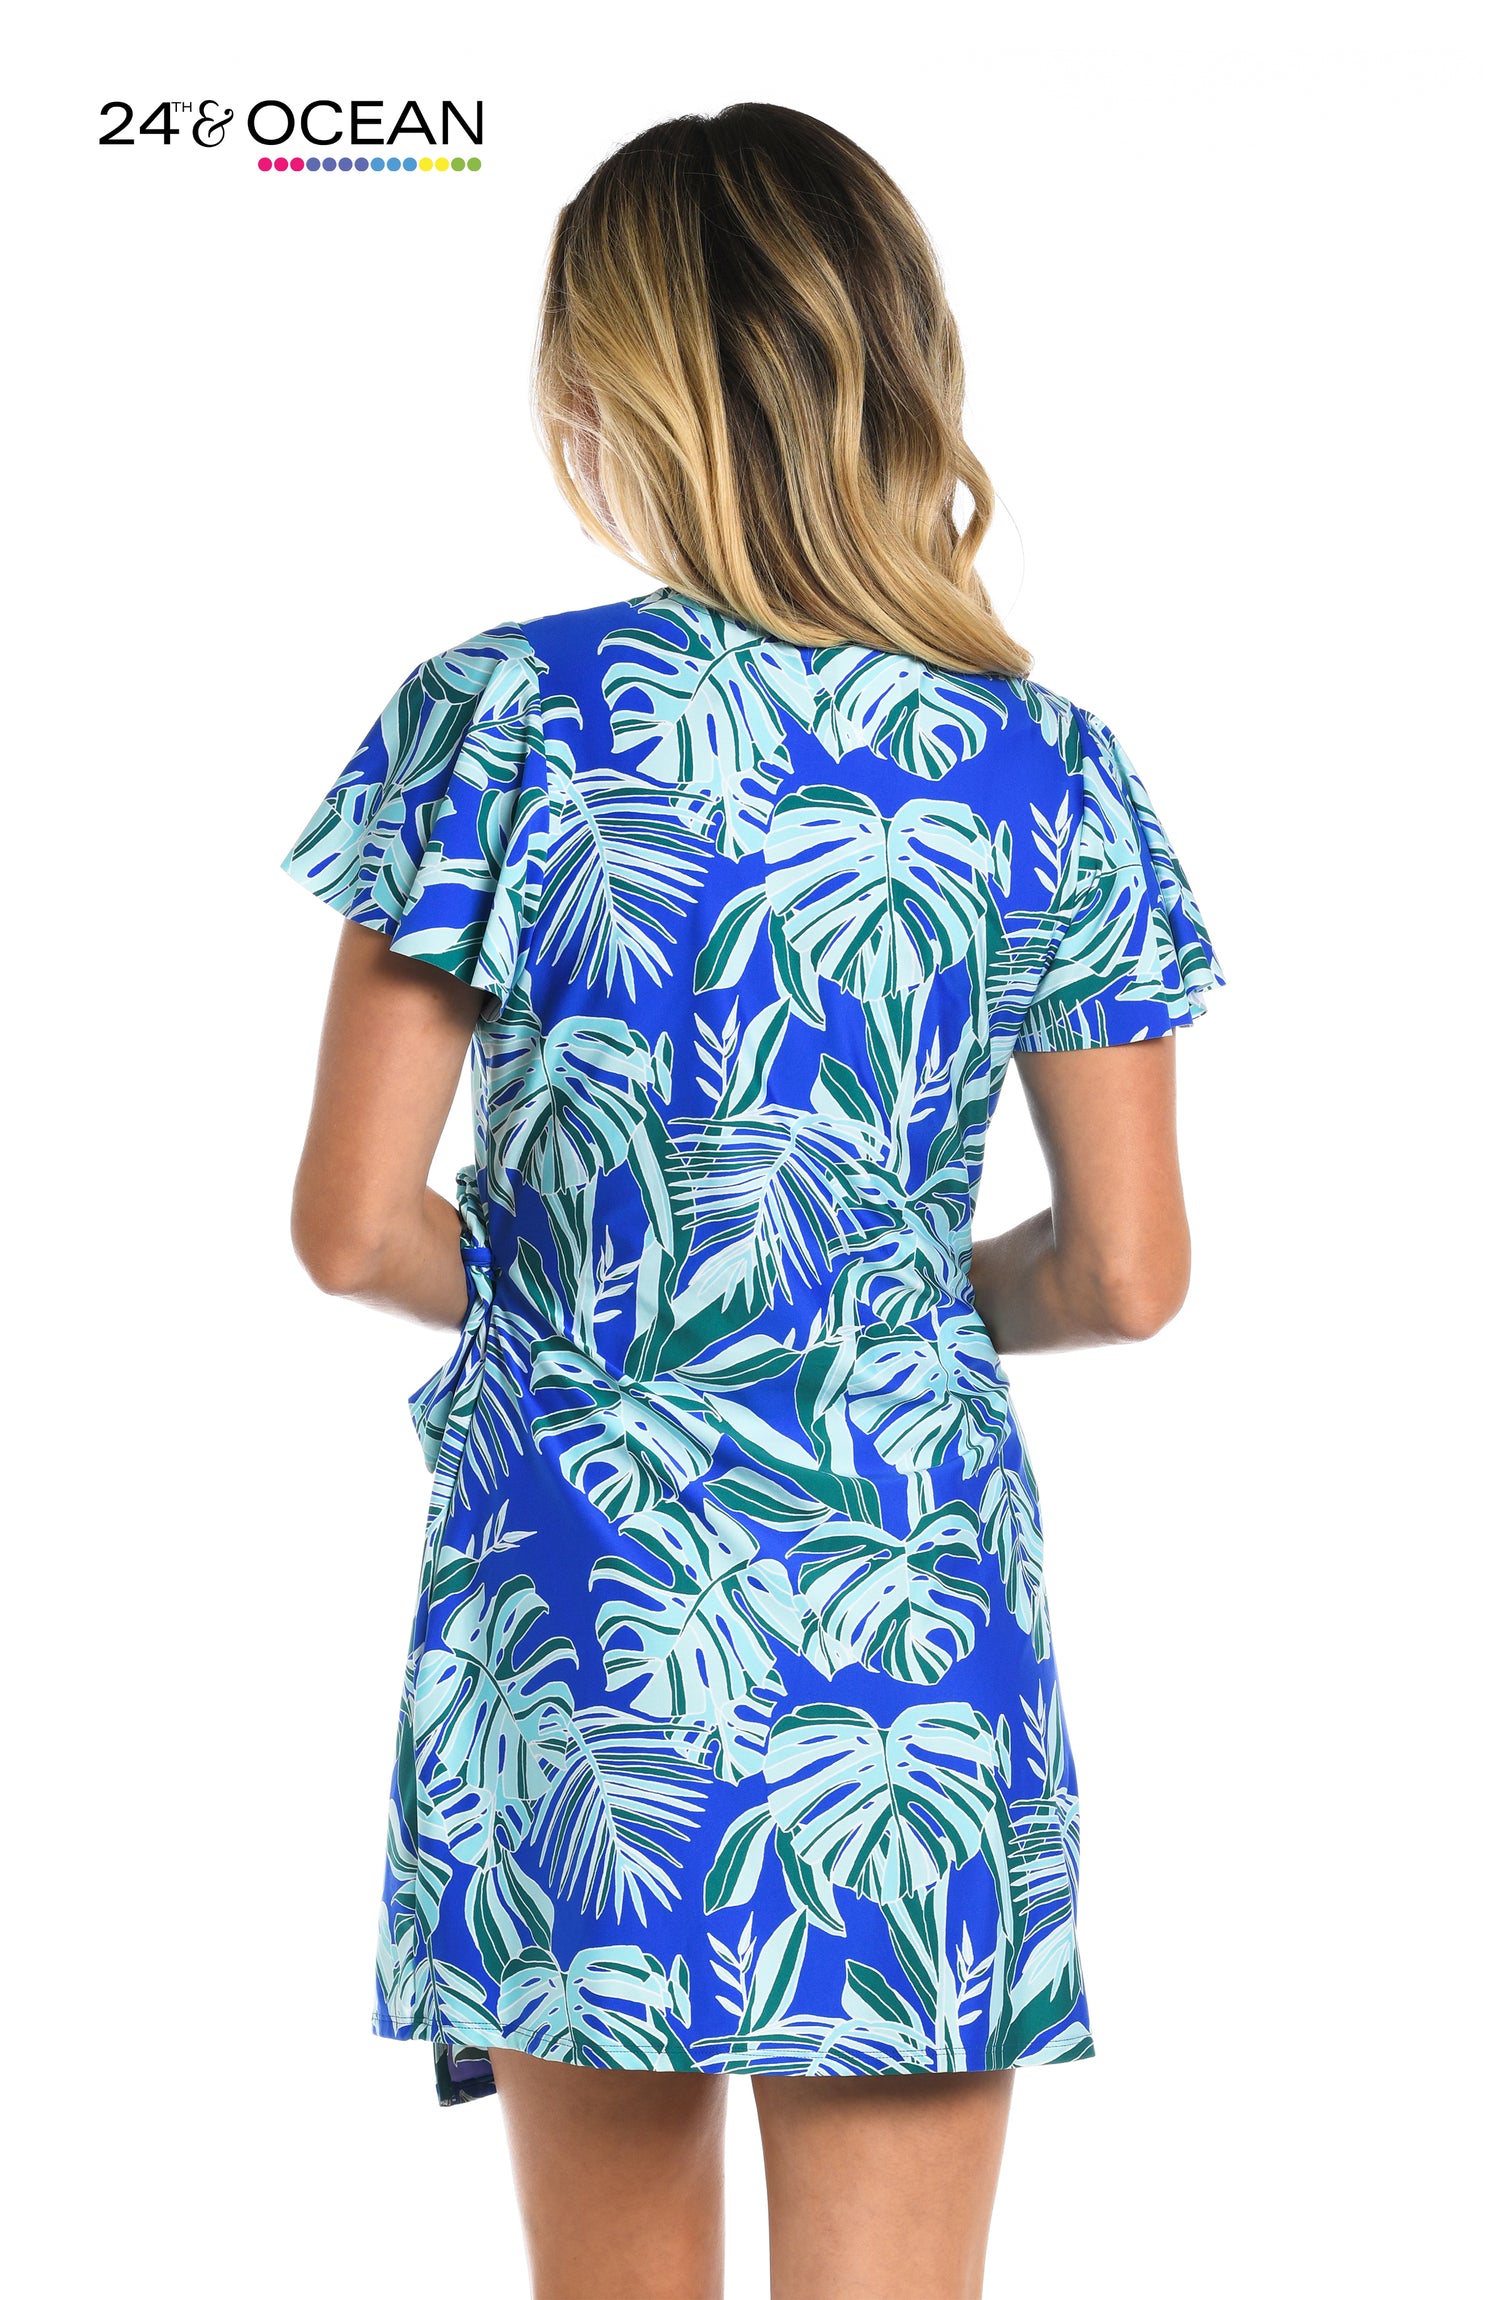 Model is wearing a sapphire multi colored tropical printed cover up dress from our West Palms collection!